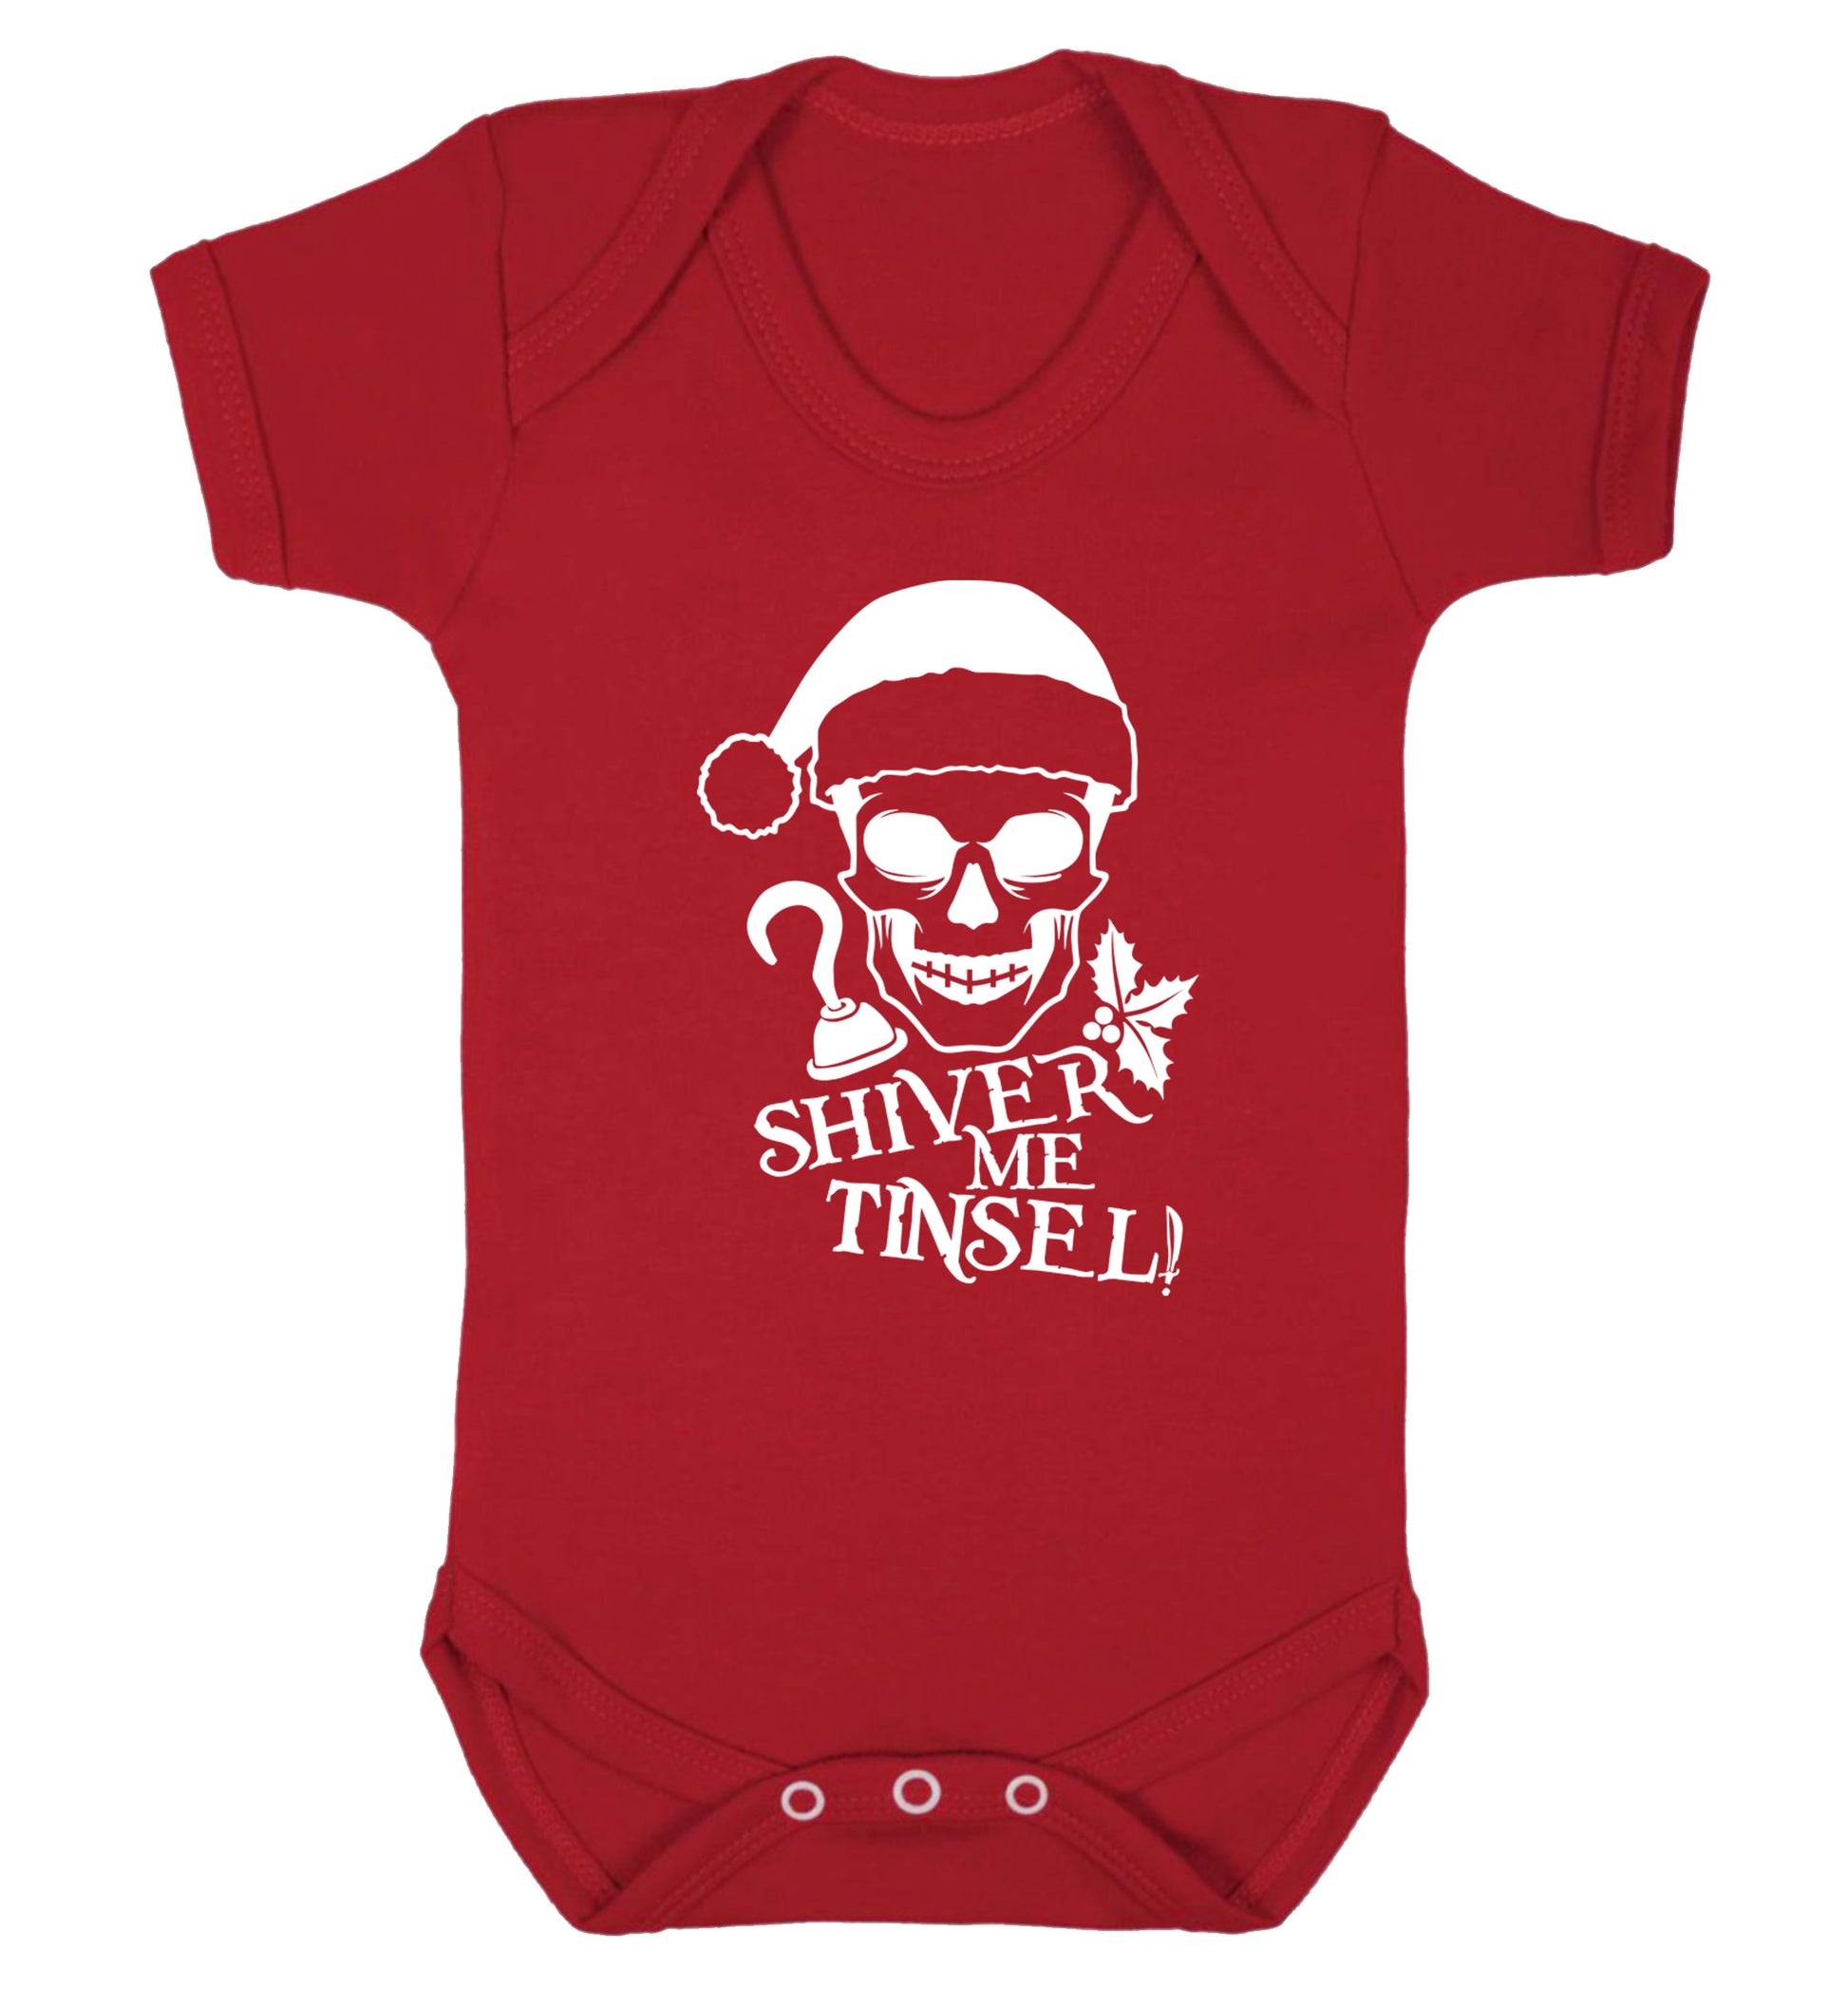 Shiver me tinsel Baby Vest red 18-24 months